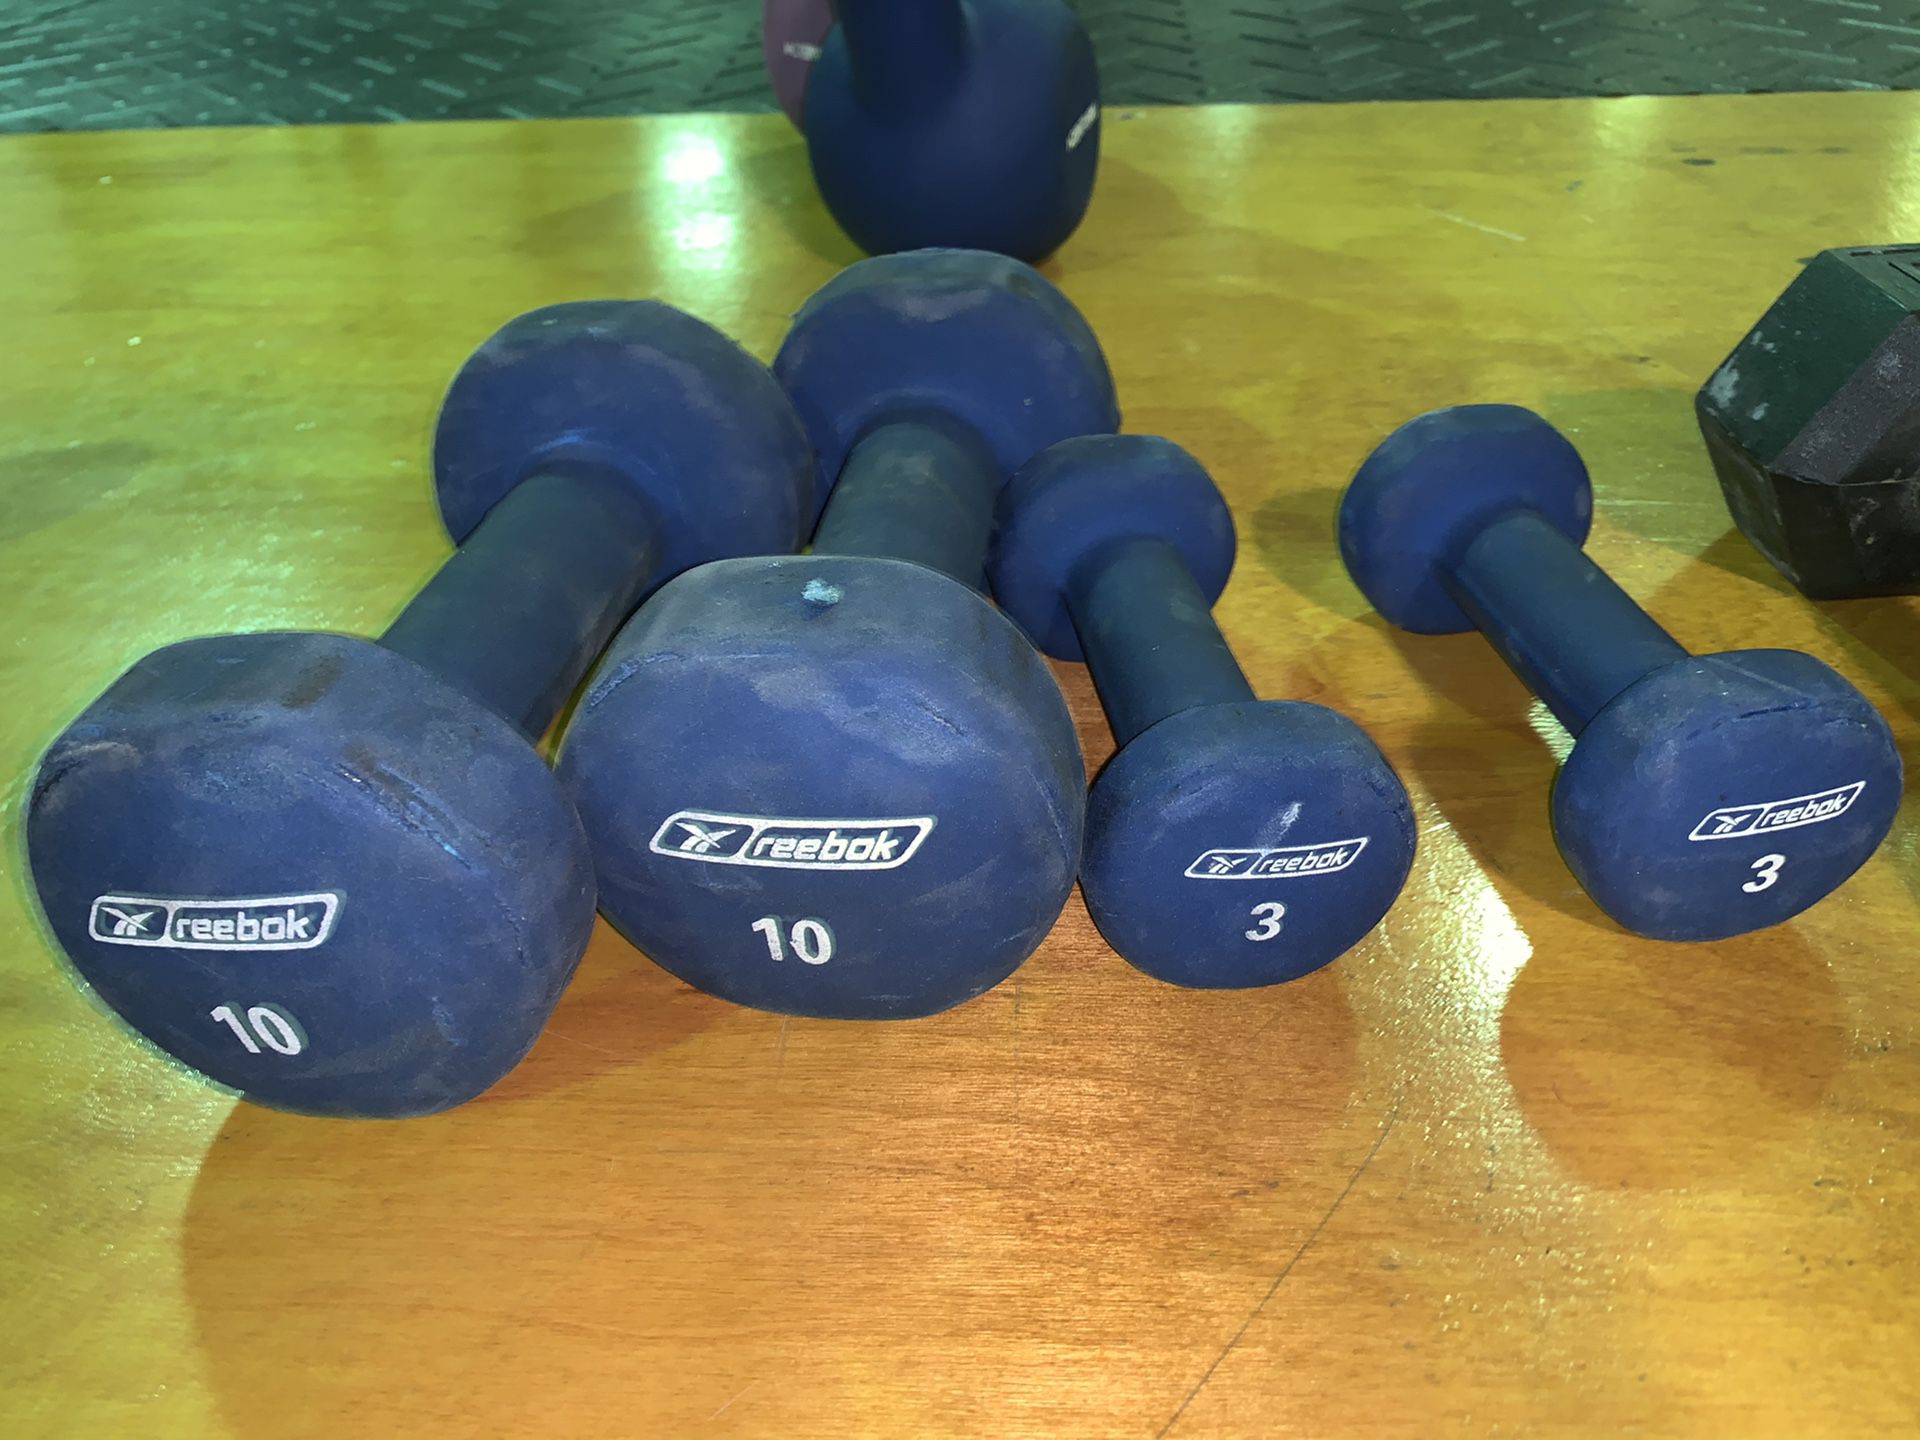 Dumbbell 10# and 3# sets